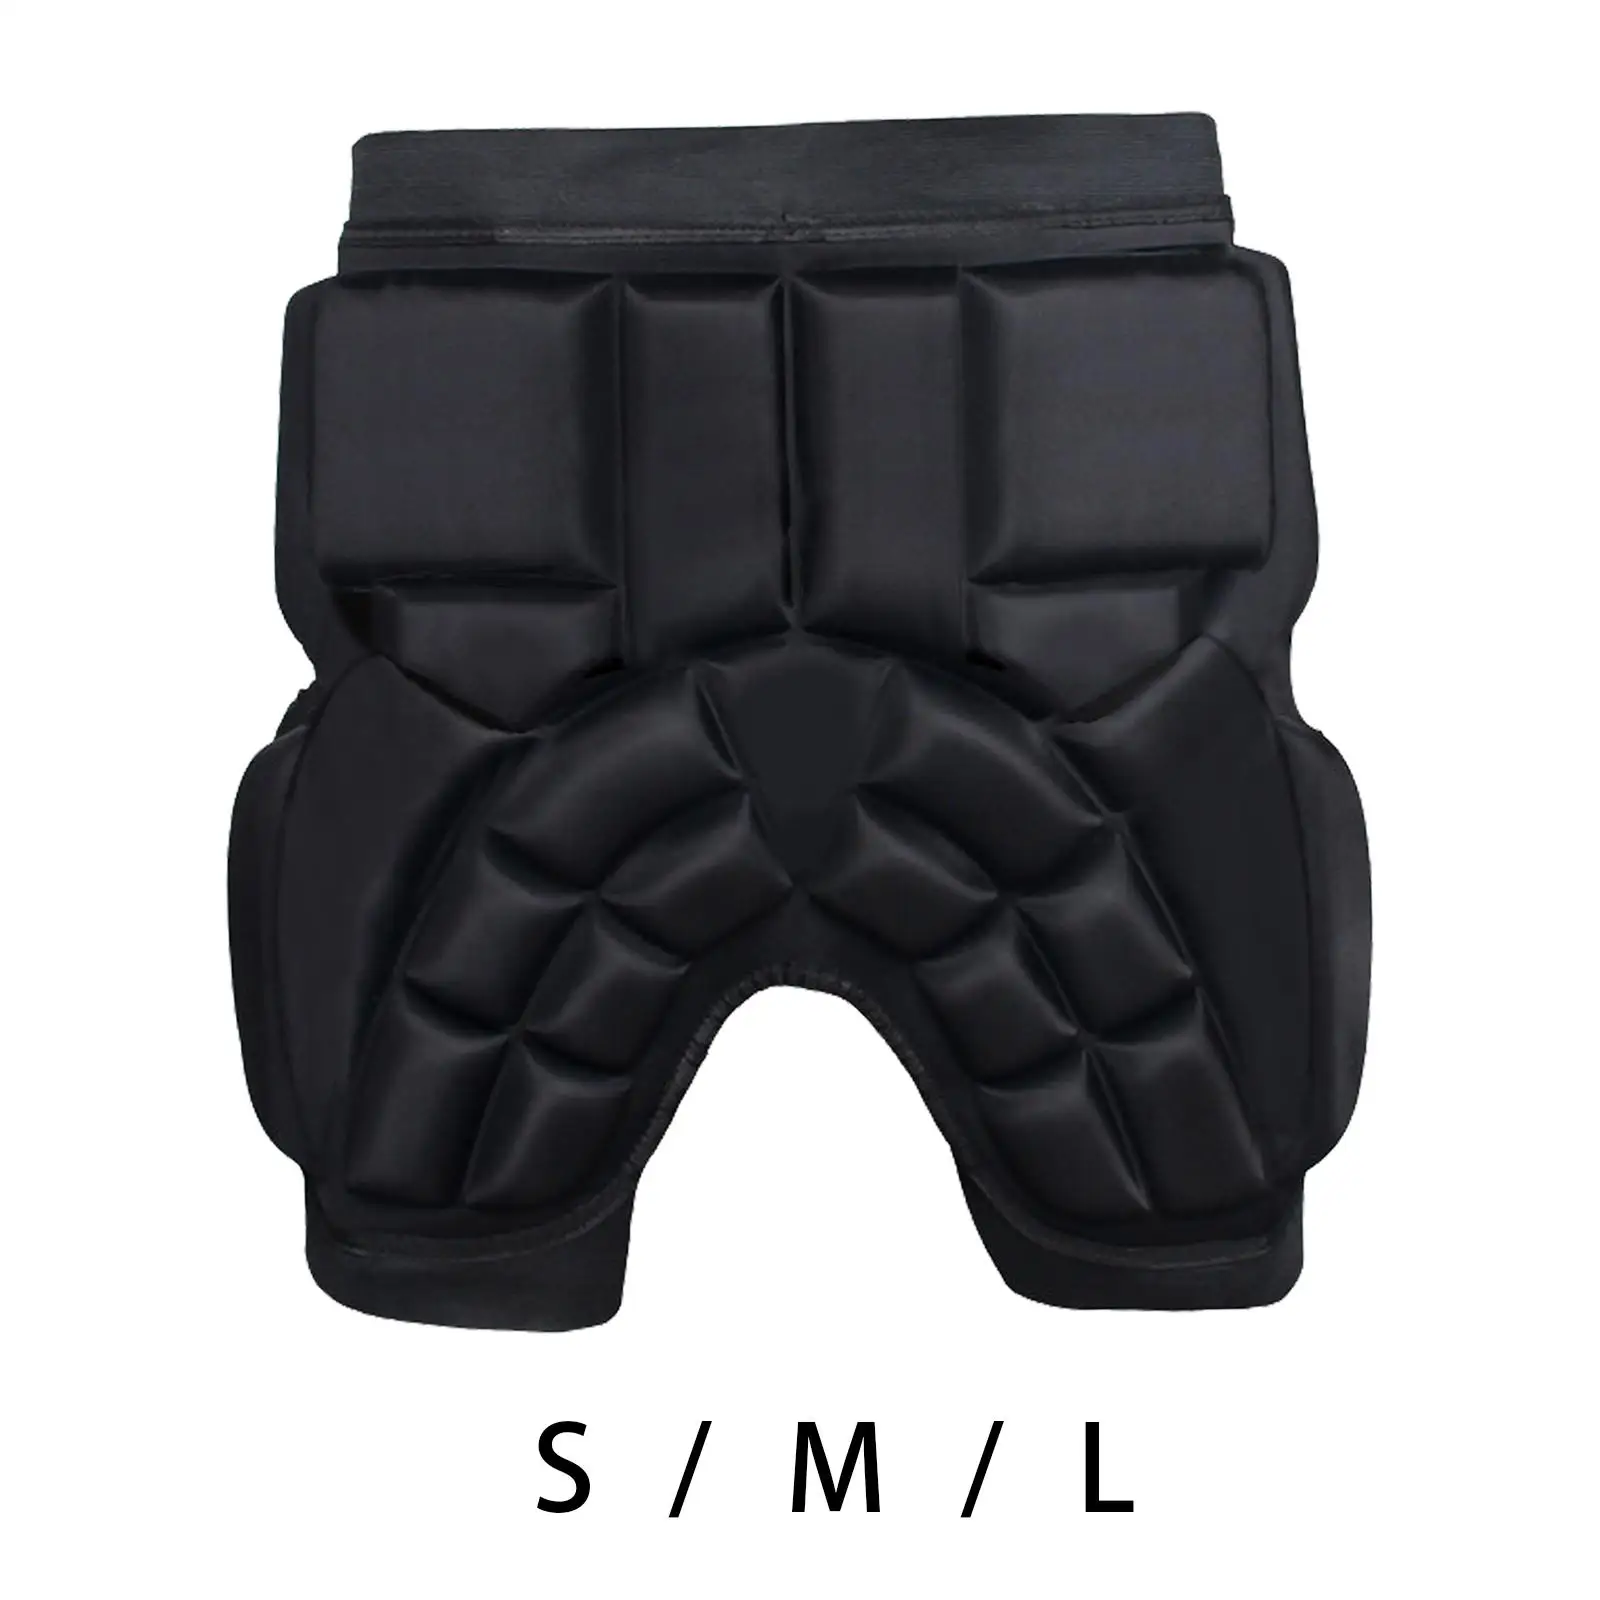 Hip Guard Pad Shockproof Supporter Guard Pad Impact Protection Support Gear for Skiing Biking Snowboarding BMX Sports